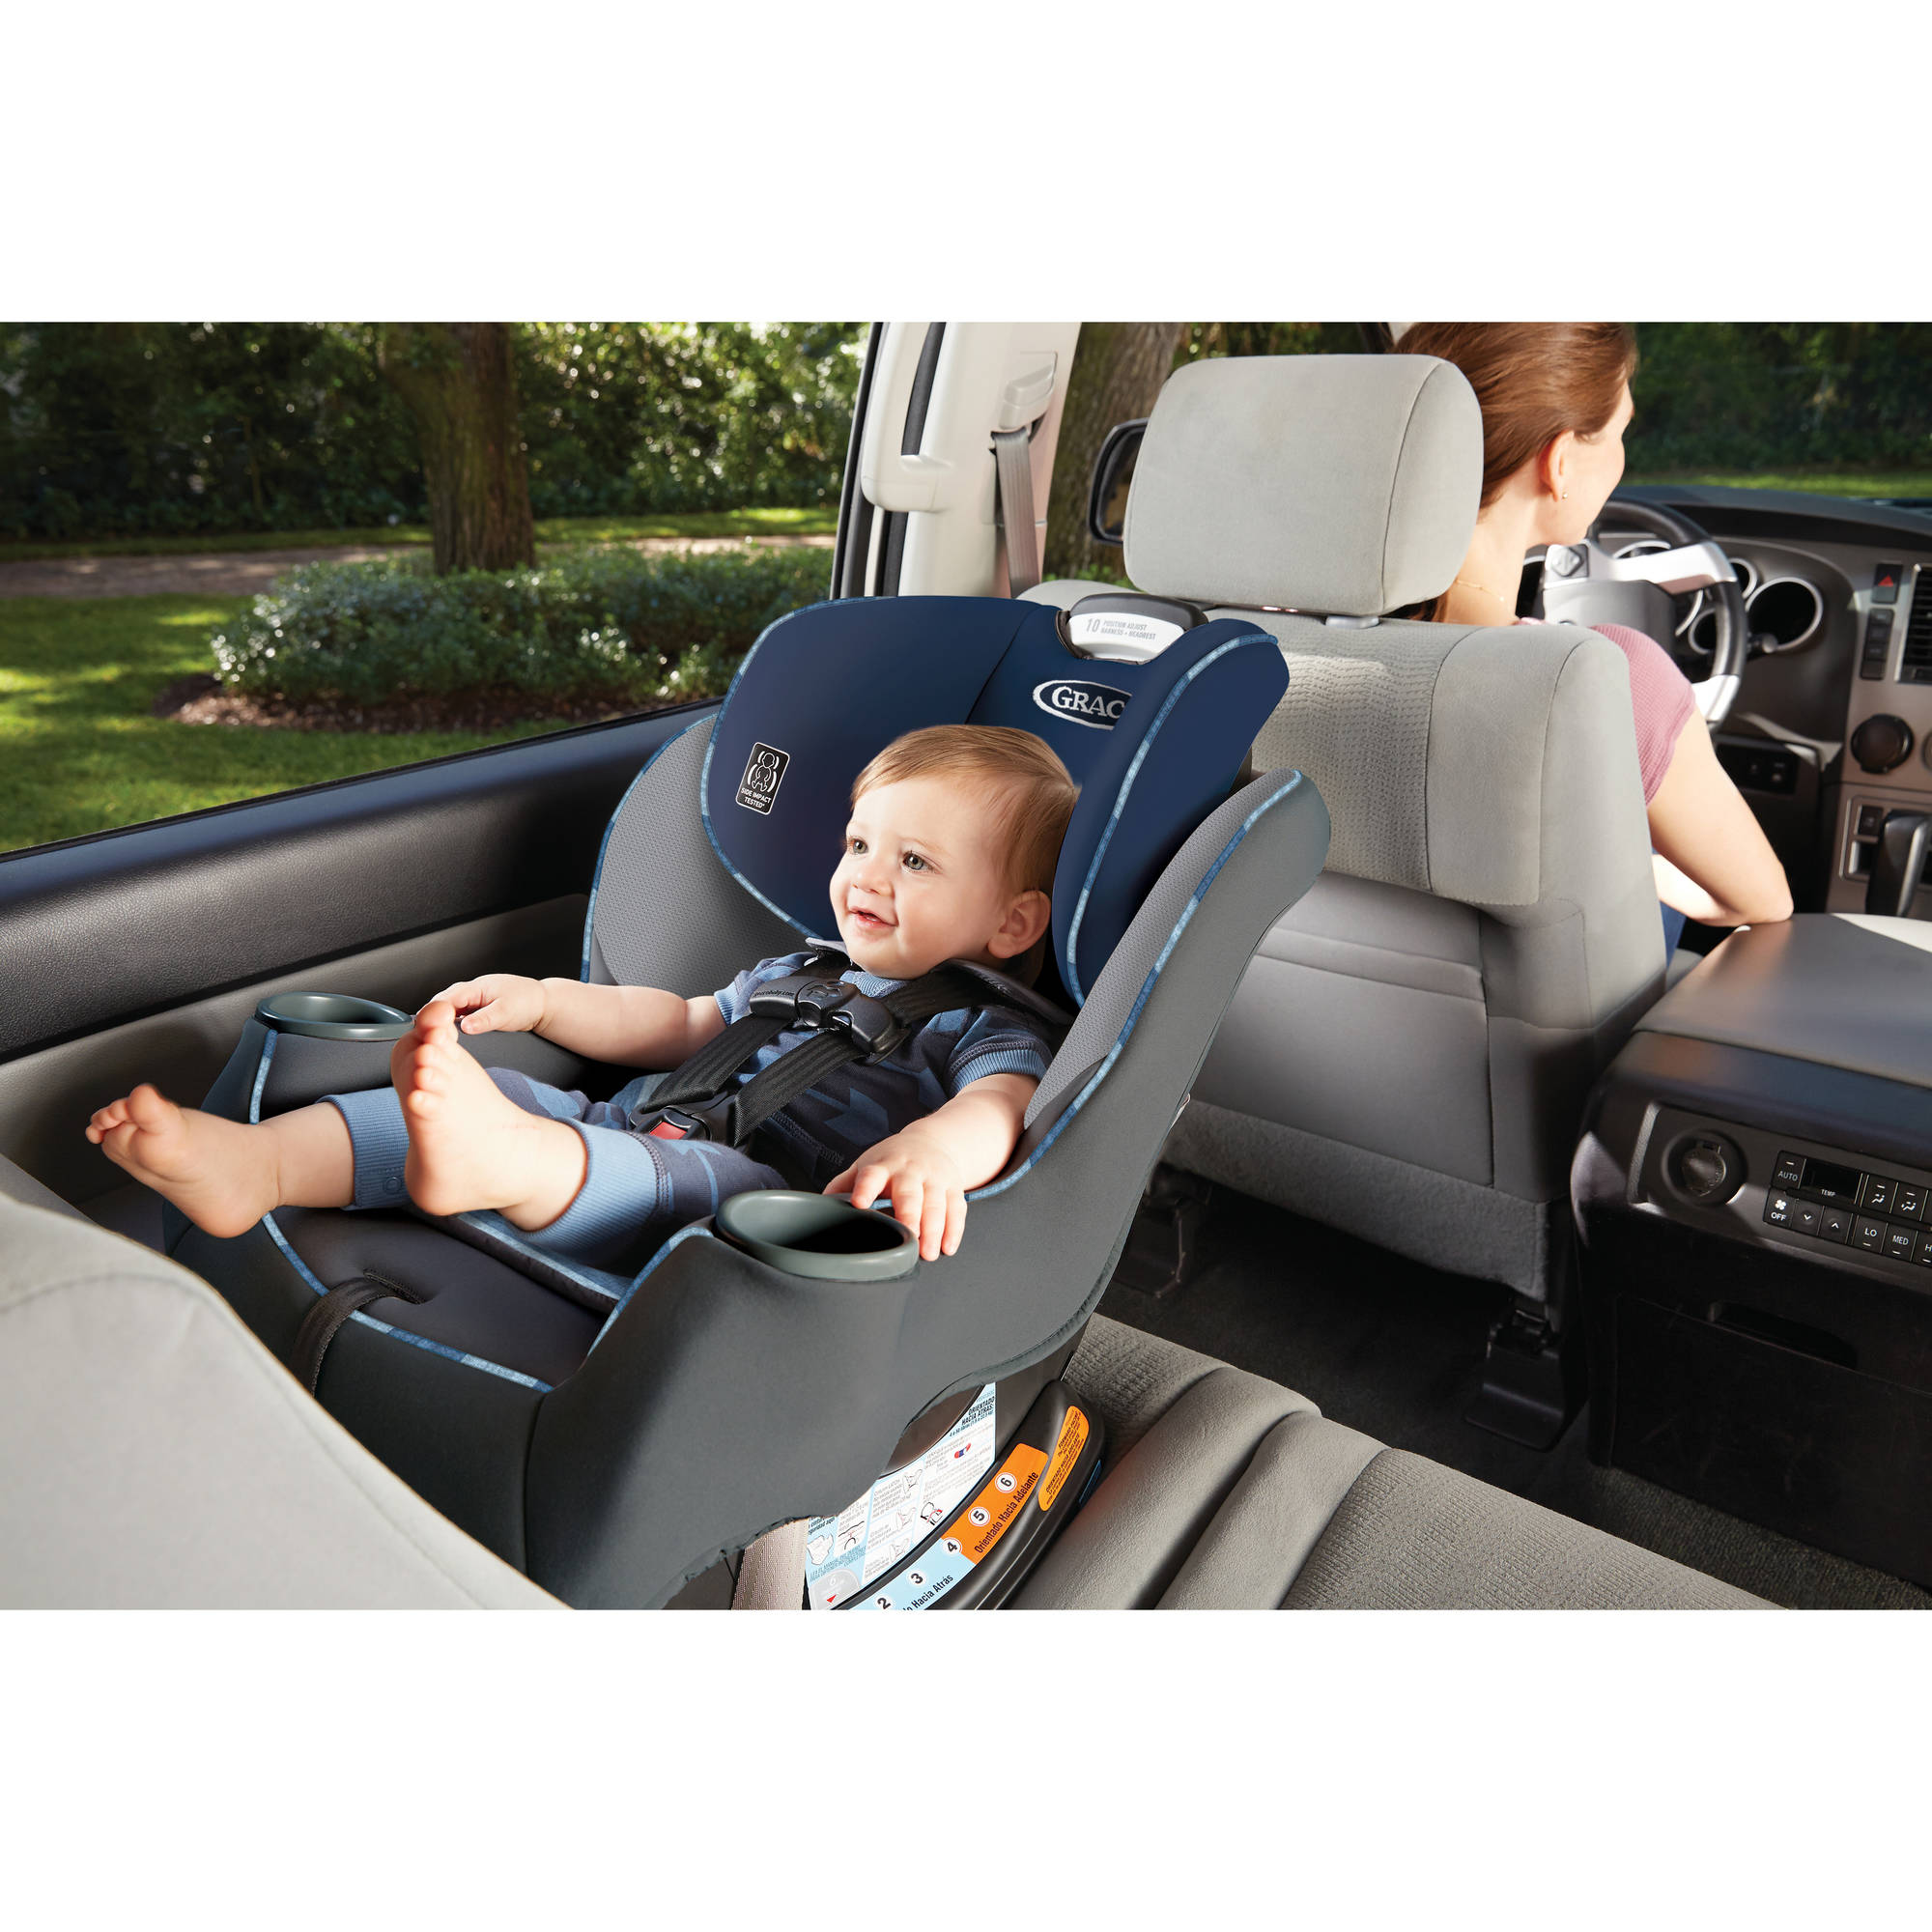 Graco Sequel 65 Convertible Car Seat with 6-Position Recline, Caden Navy - image 5 of 7